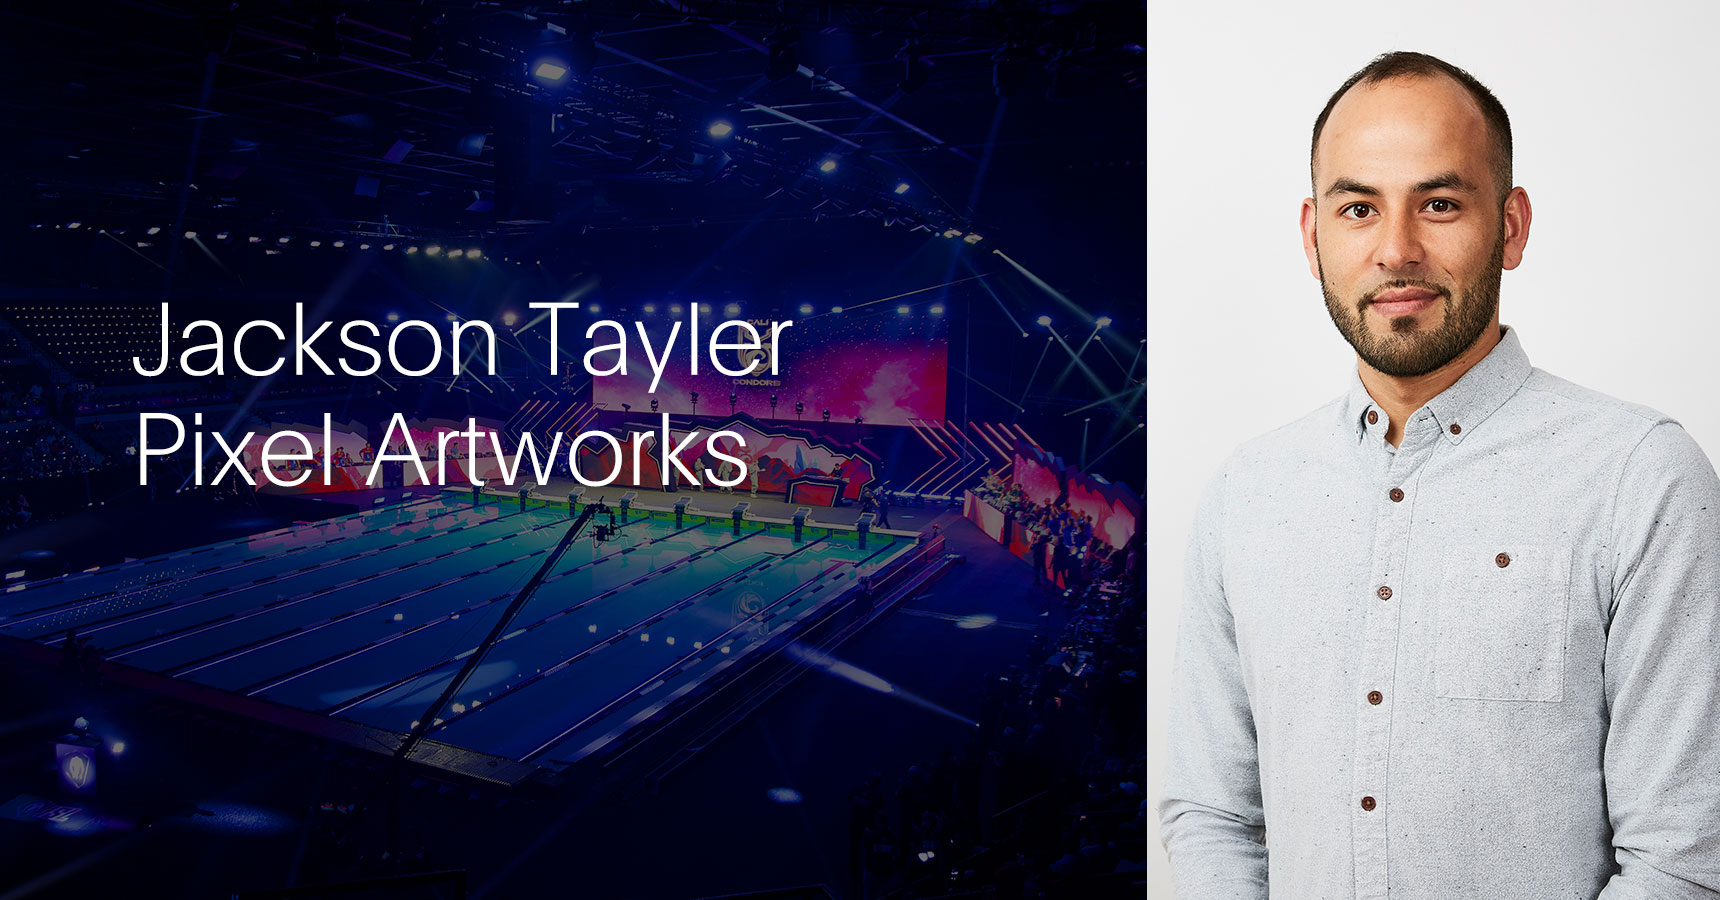 In conversation with Jackson Tayler from Pixel Artworks